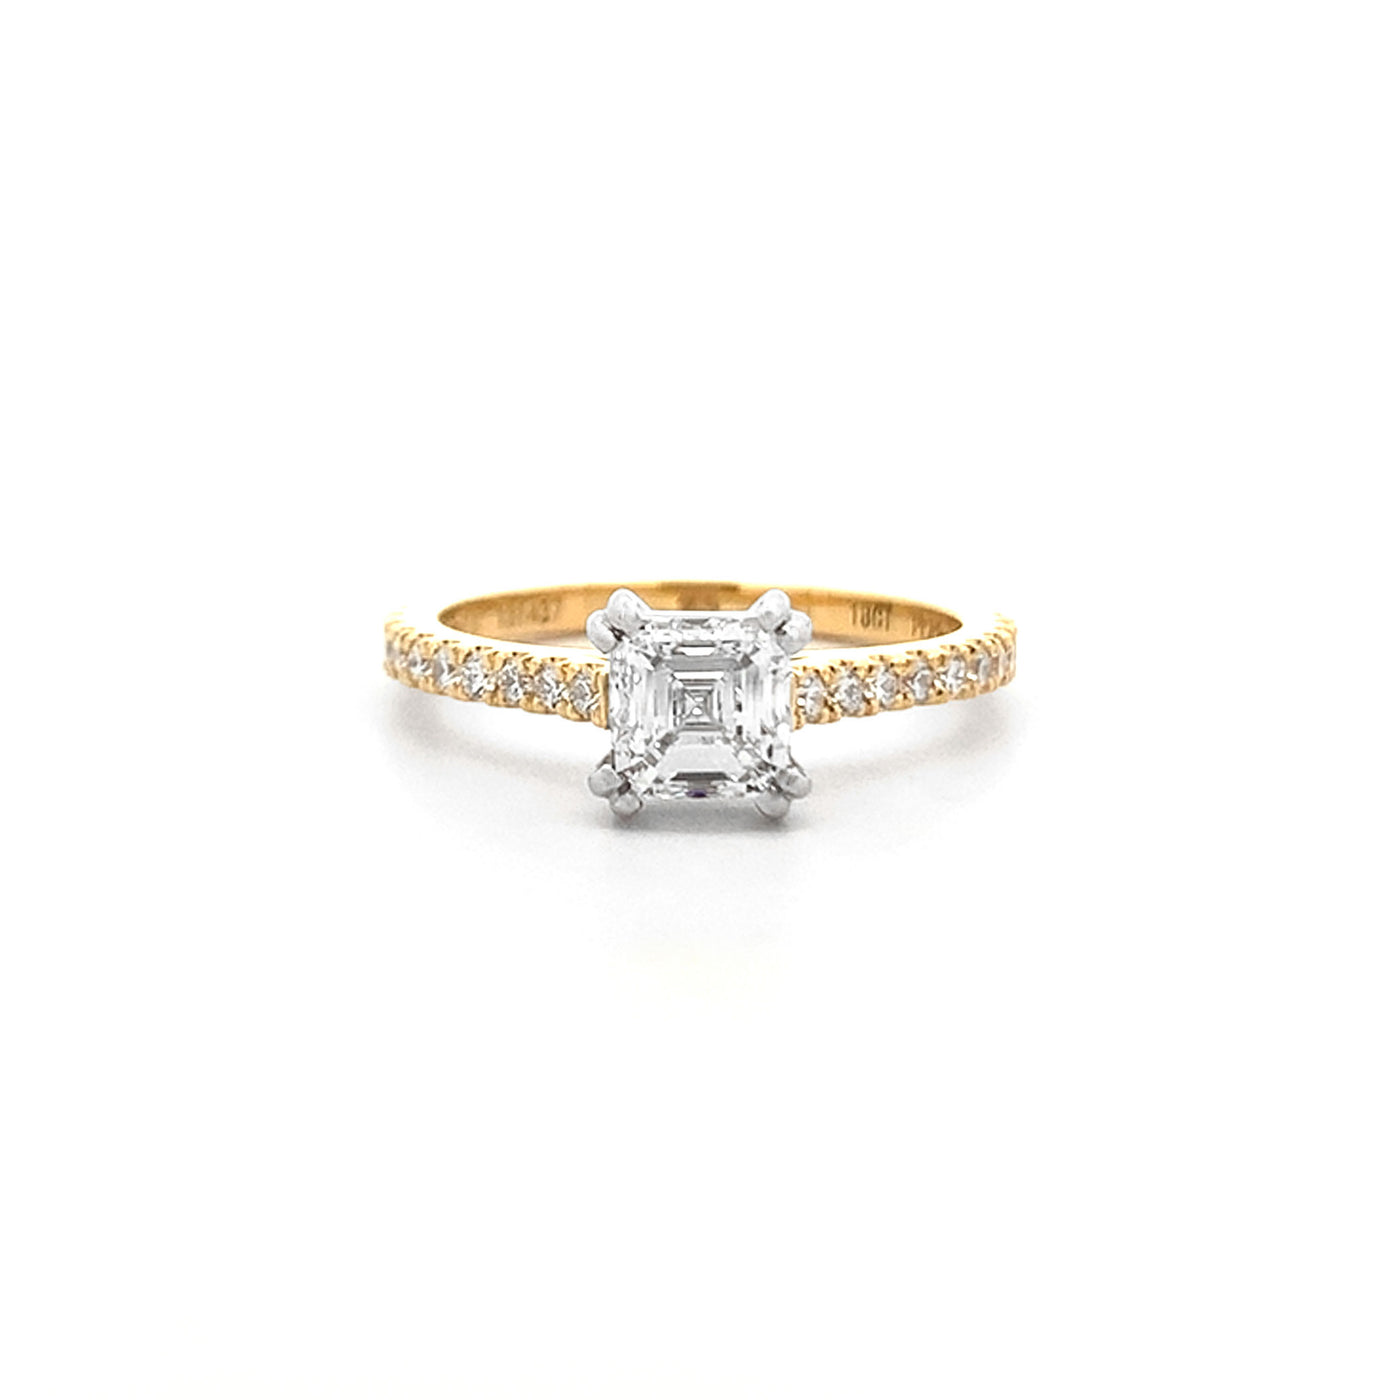 Square Emerald Cut Diamond Solitaire Ring with Diamond Band in Yellow Gold | 1.30ctw